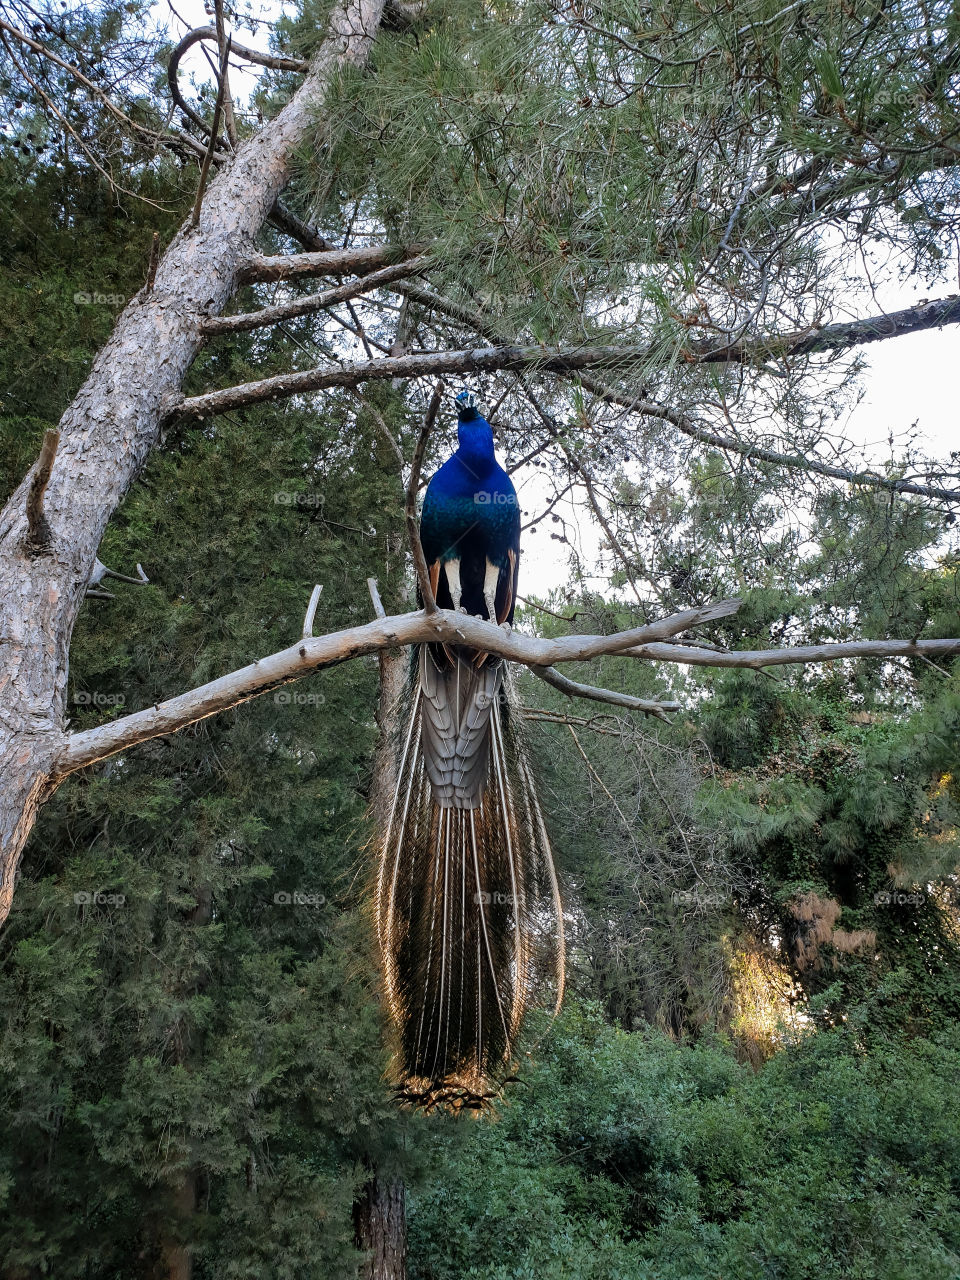 Peacock sits on a tree branch in the forest and looks directly at the camera